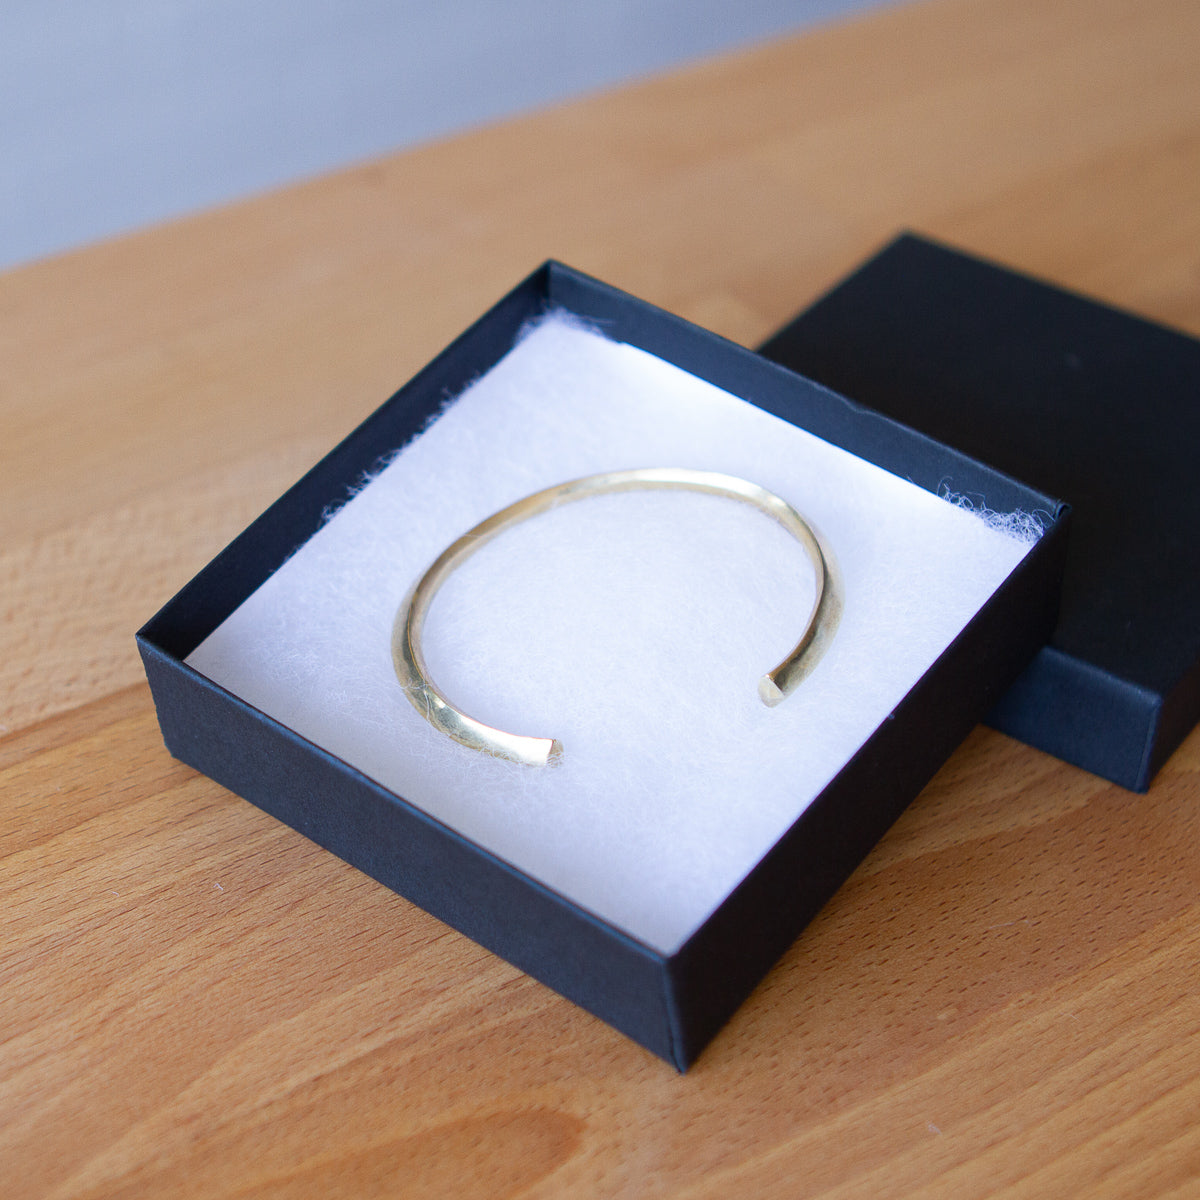 Bronze minimal cuff bracelet with faceted sides and pentagon shaped ends in a gift box